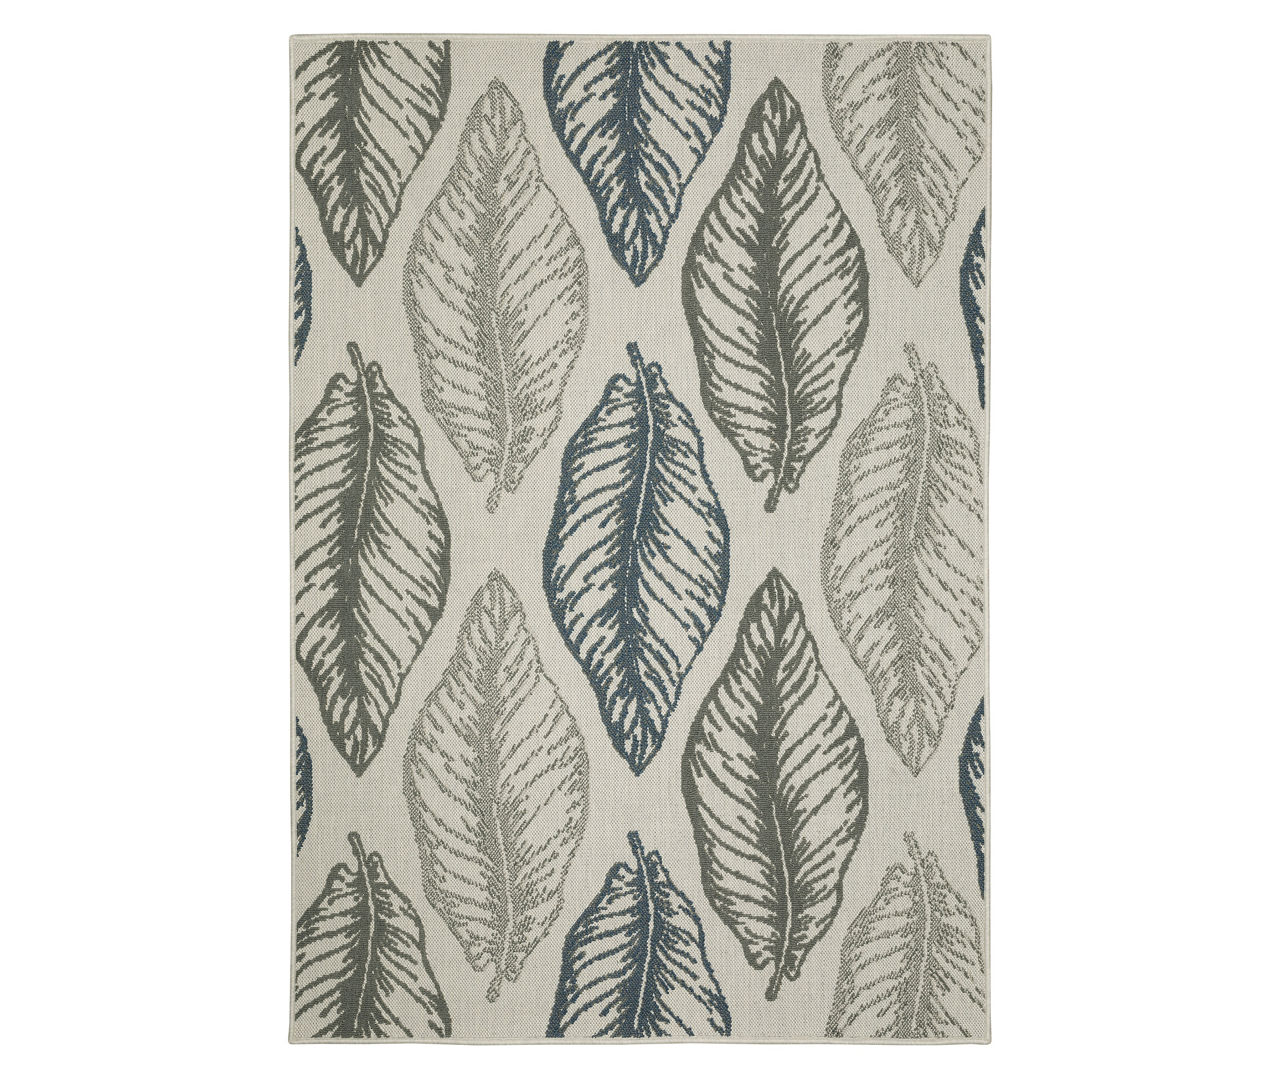 Torian Beige, Green & Blue Leaves Outdoor Area Rug, (9.1' x 12.1')